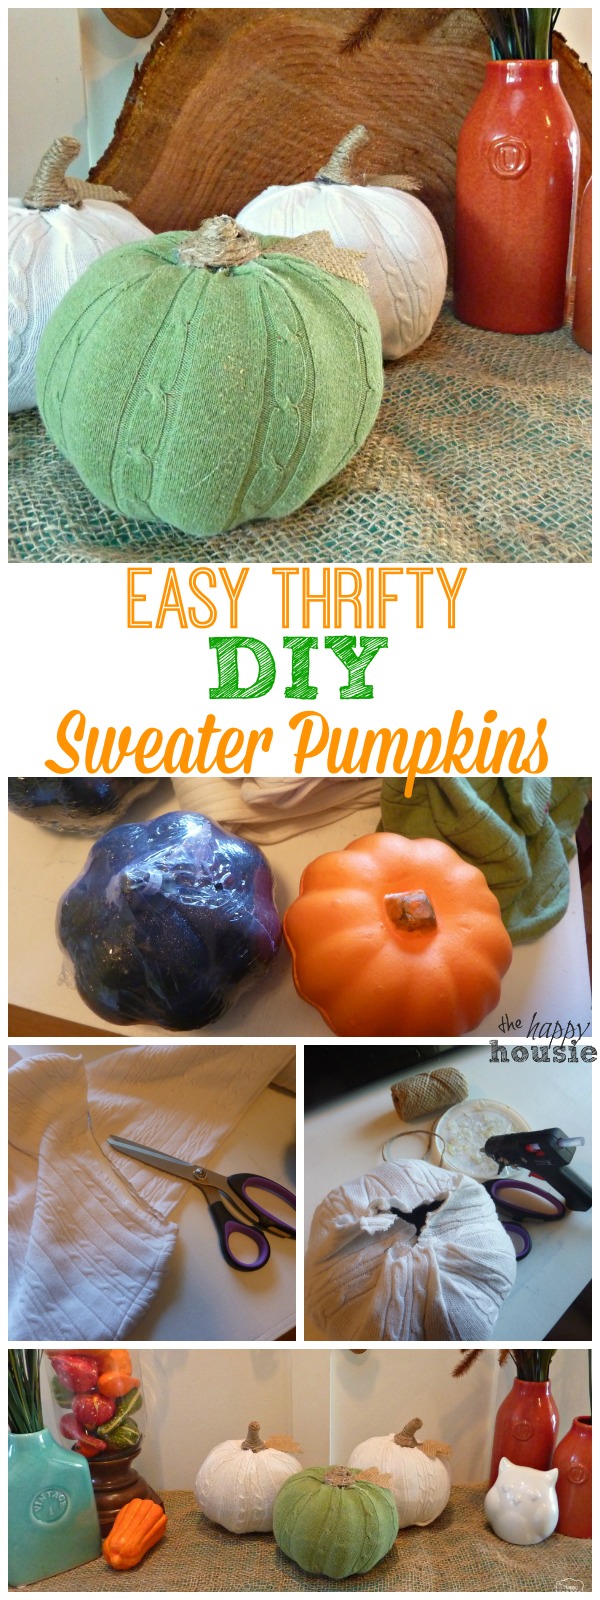 Easy Thrifty DIY Sweater Pumpkins graphic.